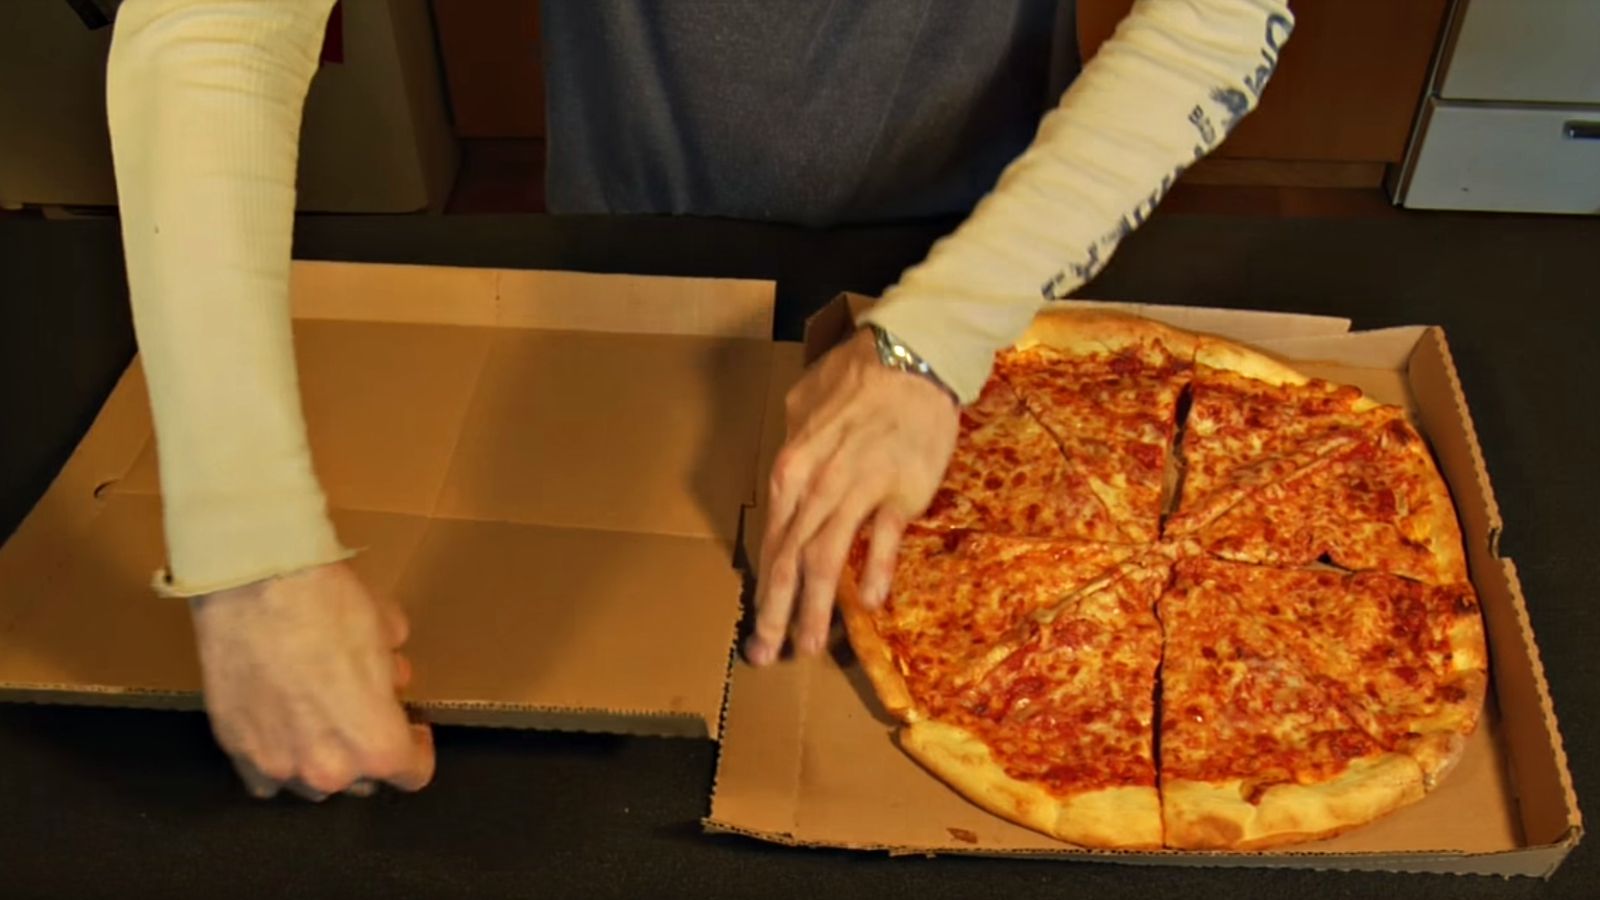 After You See What’s He’s Doing, You’ll Never Look at a Pizza Box the Same Way Again